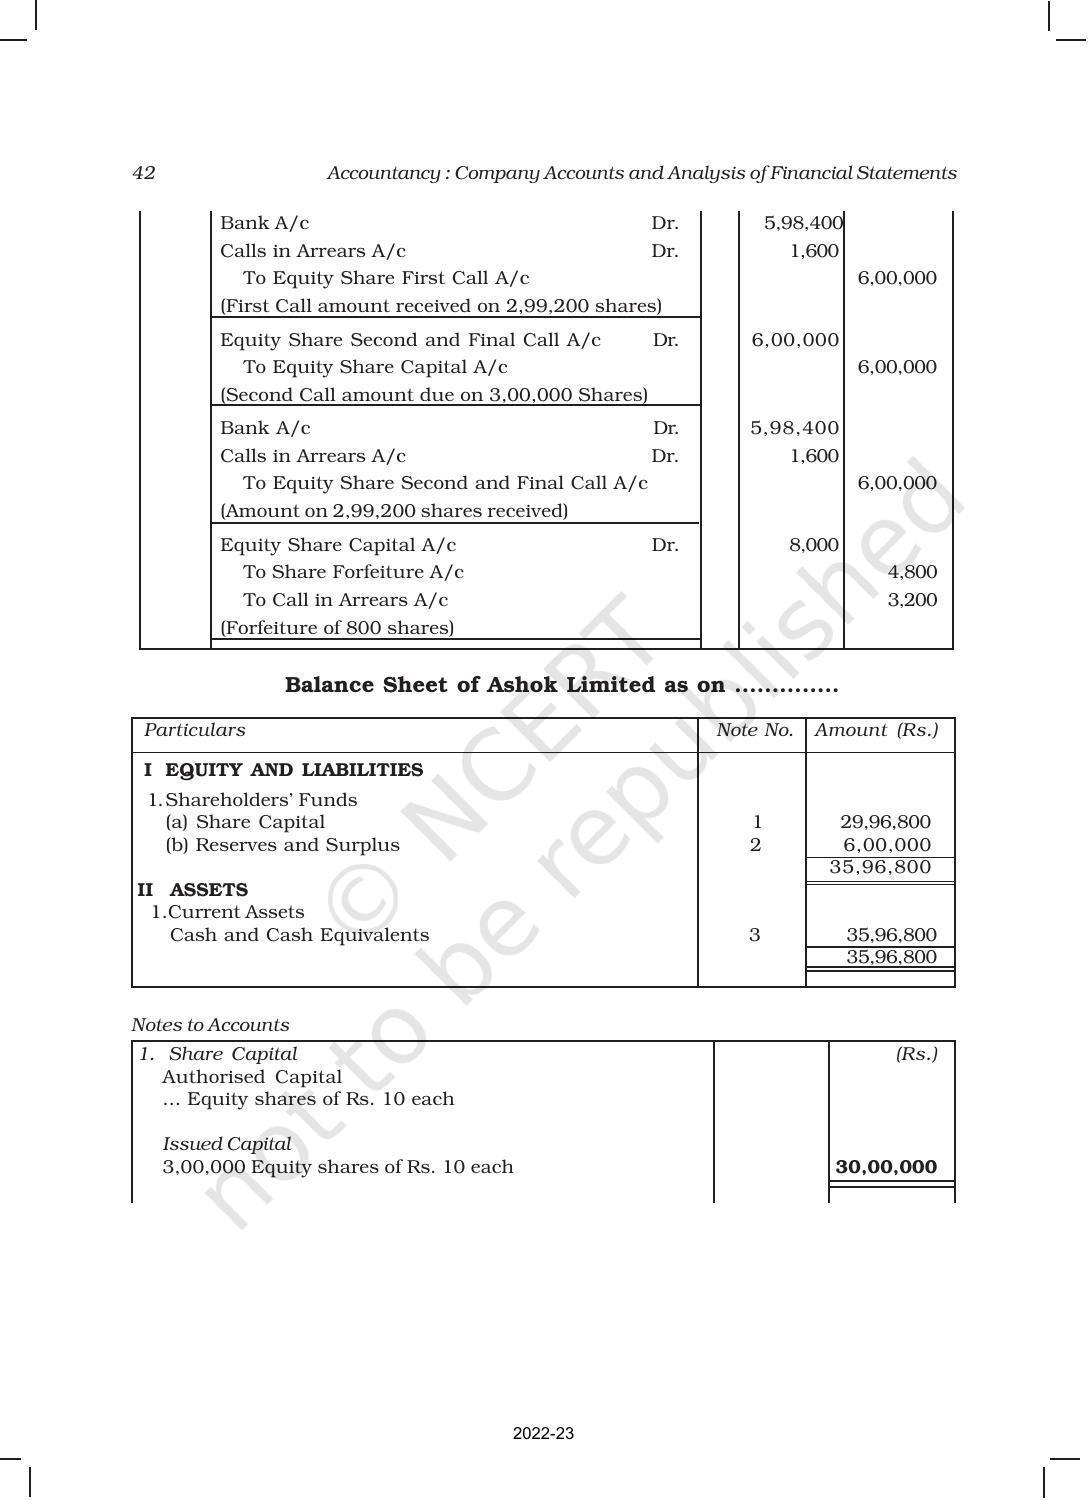 NCERT Book for Class 12 Accountancy Part II Chapter 1 Accounting for Share Capital - Page 42